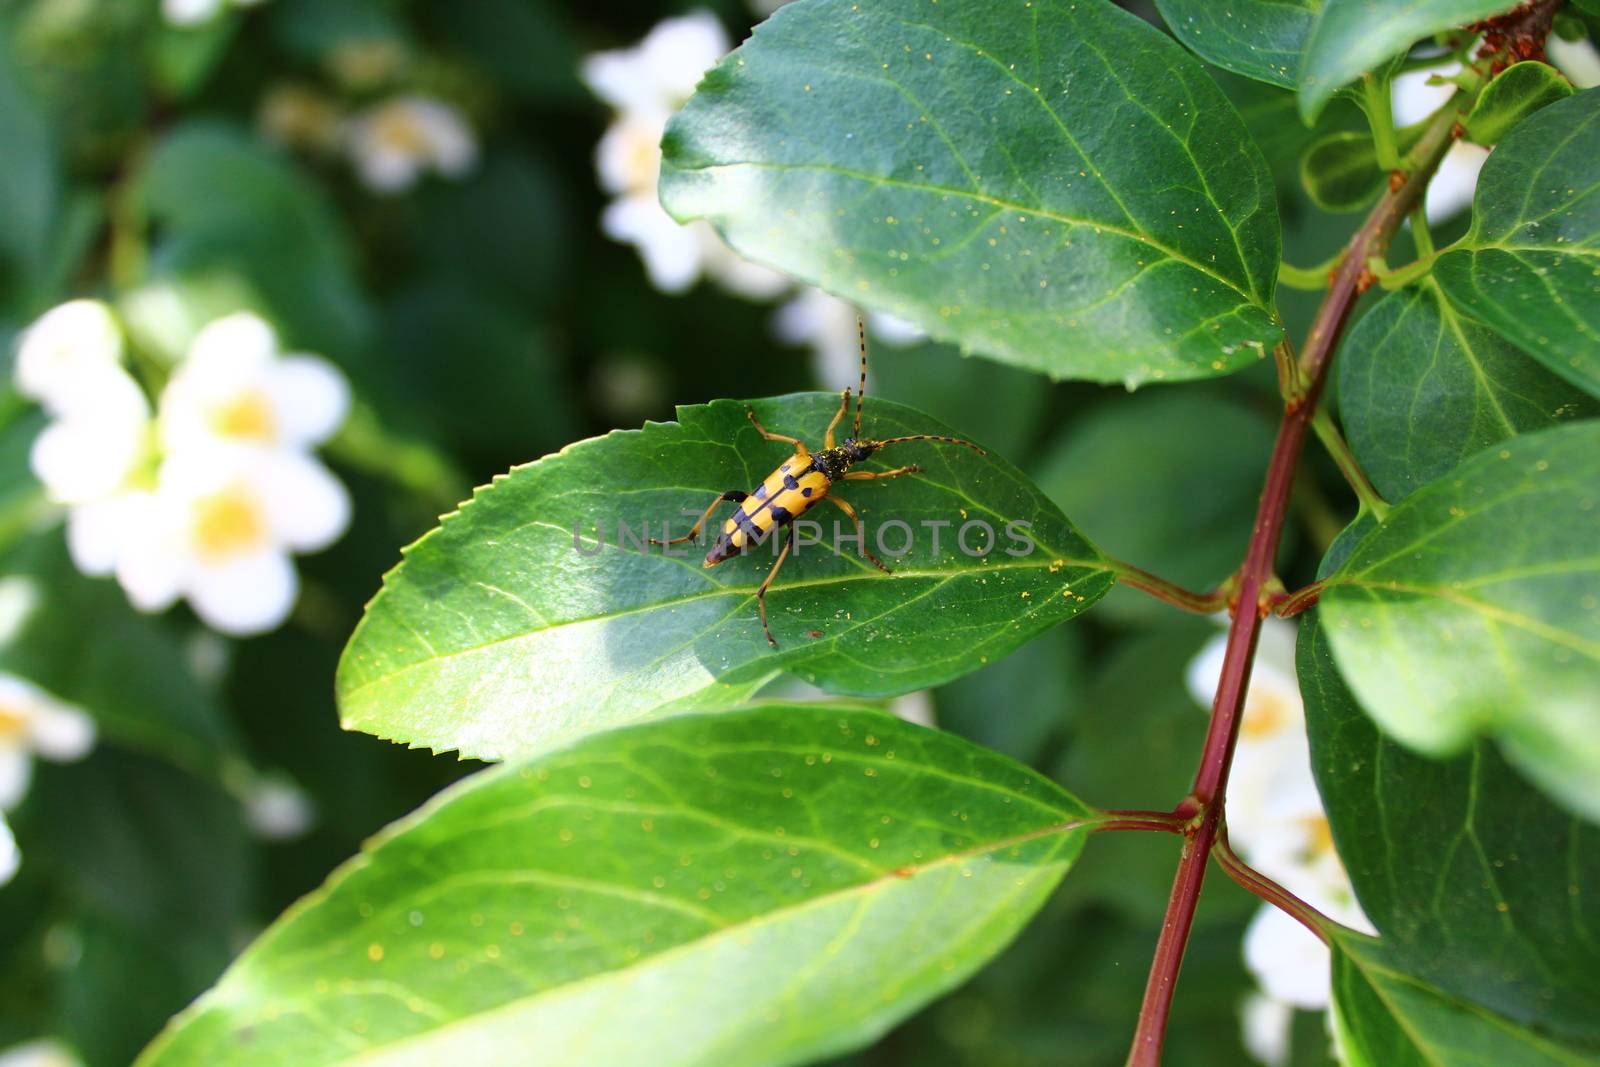 black and yellow longhorn beetle in the jasmine by martina_unbehauen